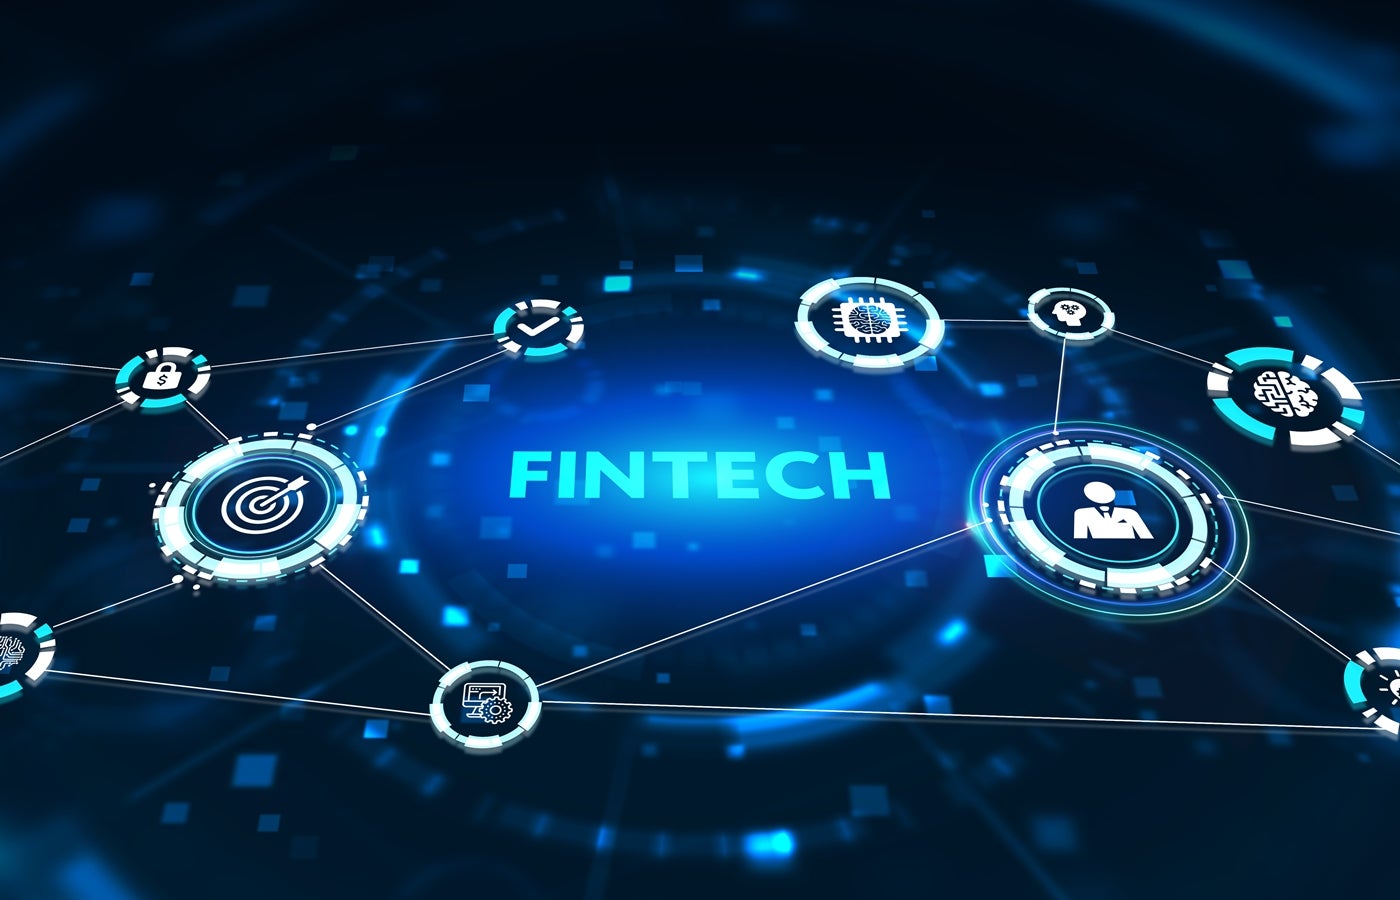 Everything you need to know about Fintech